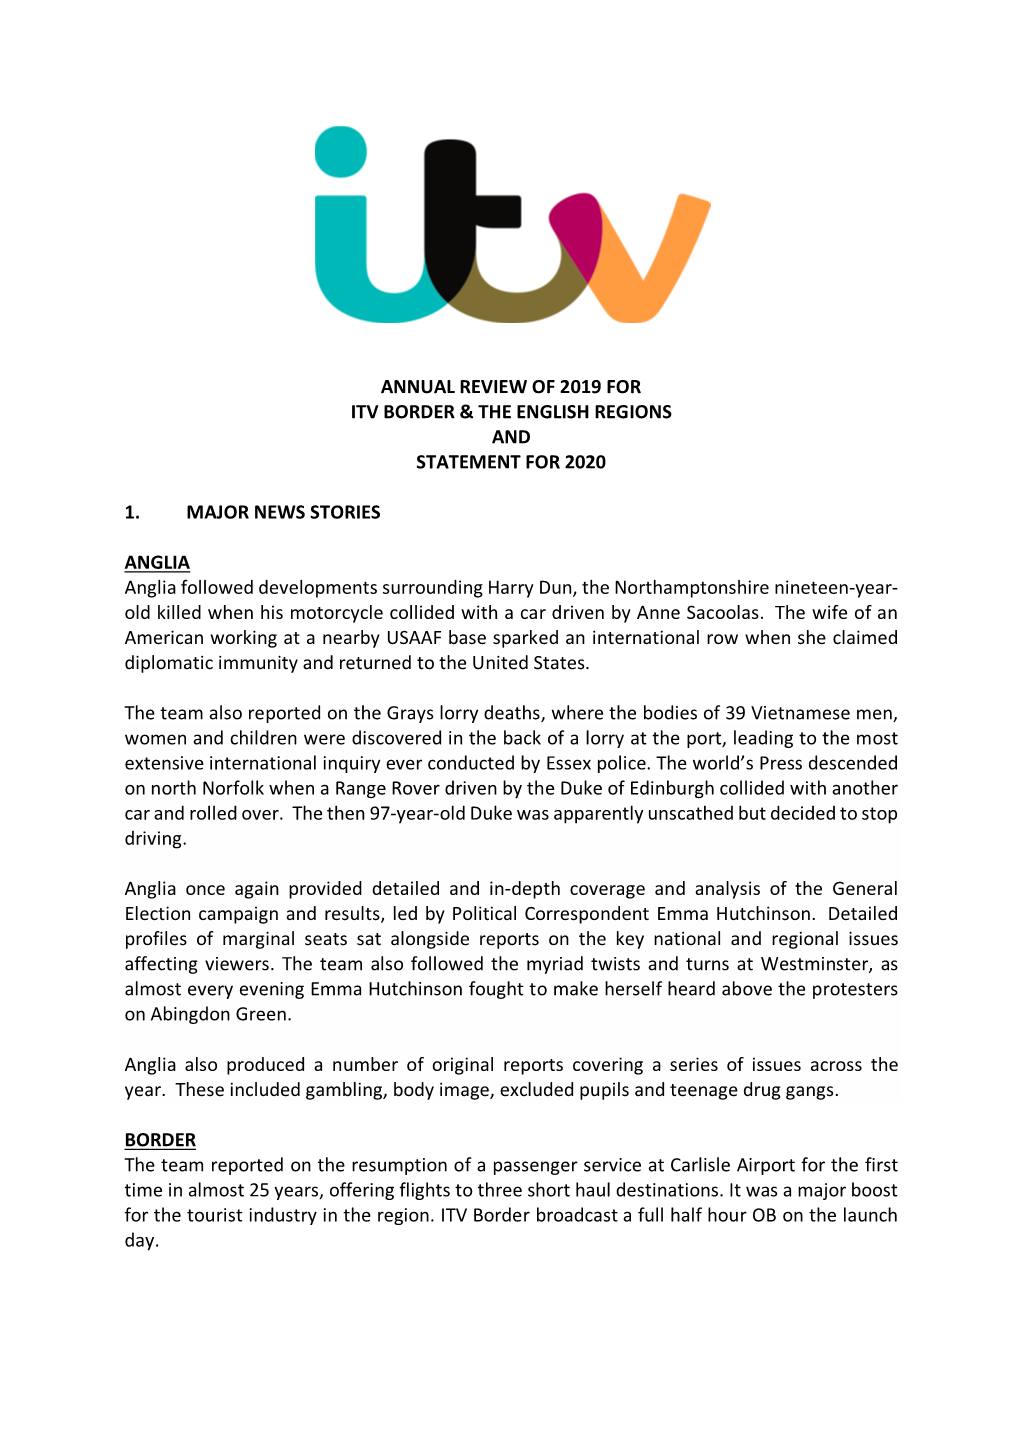 Annual Review of 2019 for Itv Border & the English